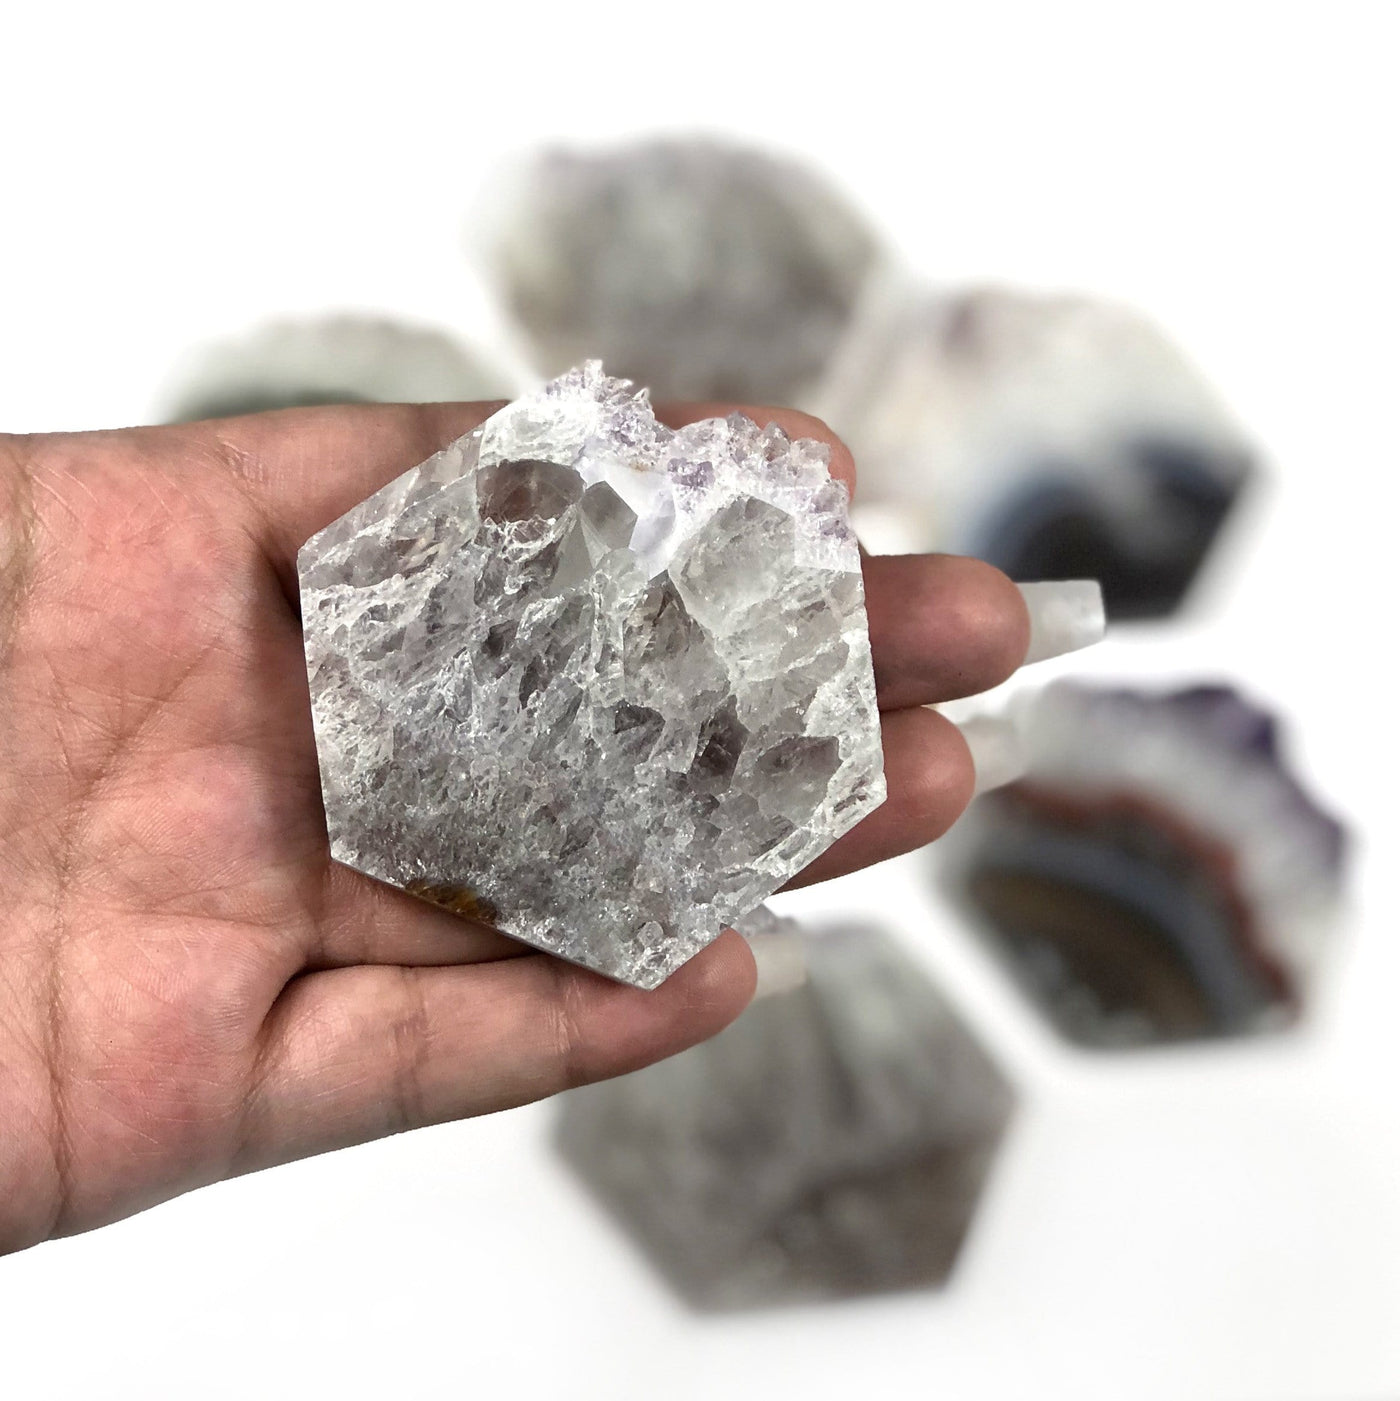 large amethyst slice displayed in hand for size reference